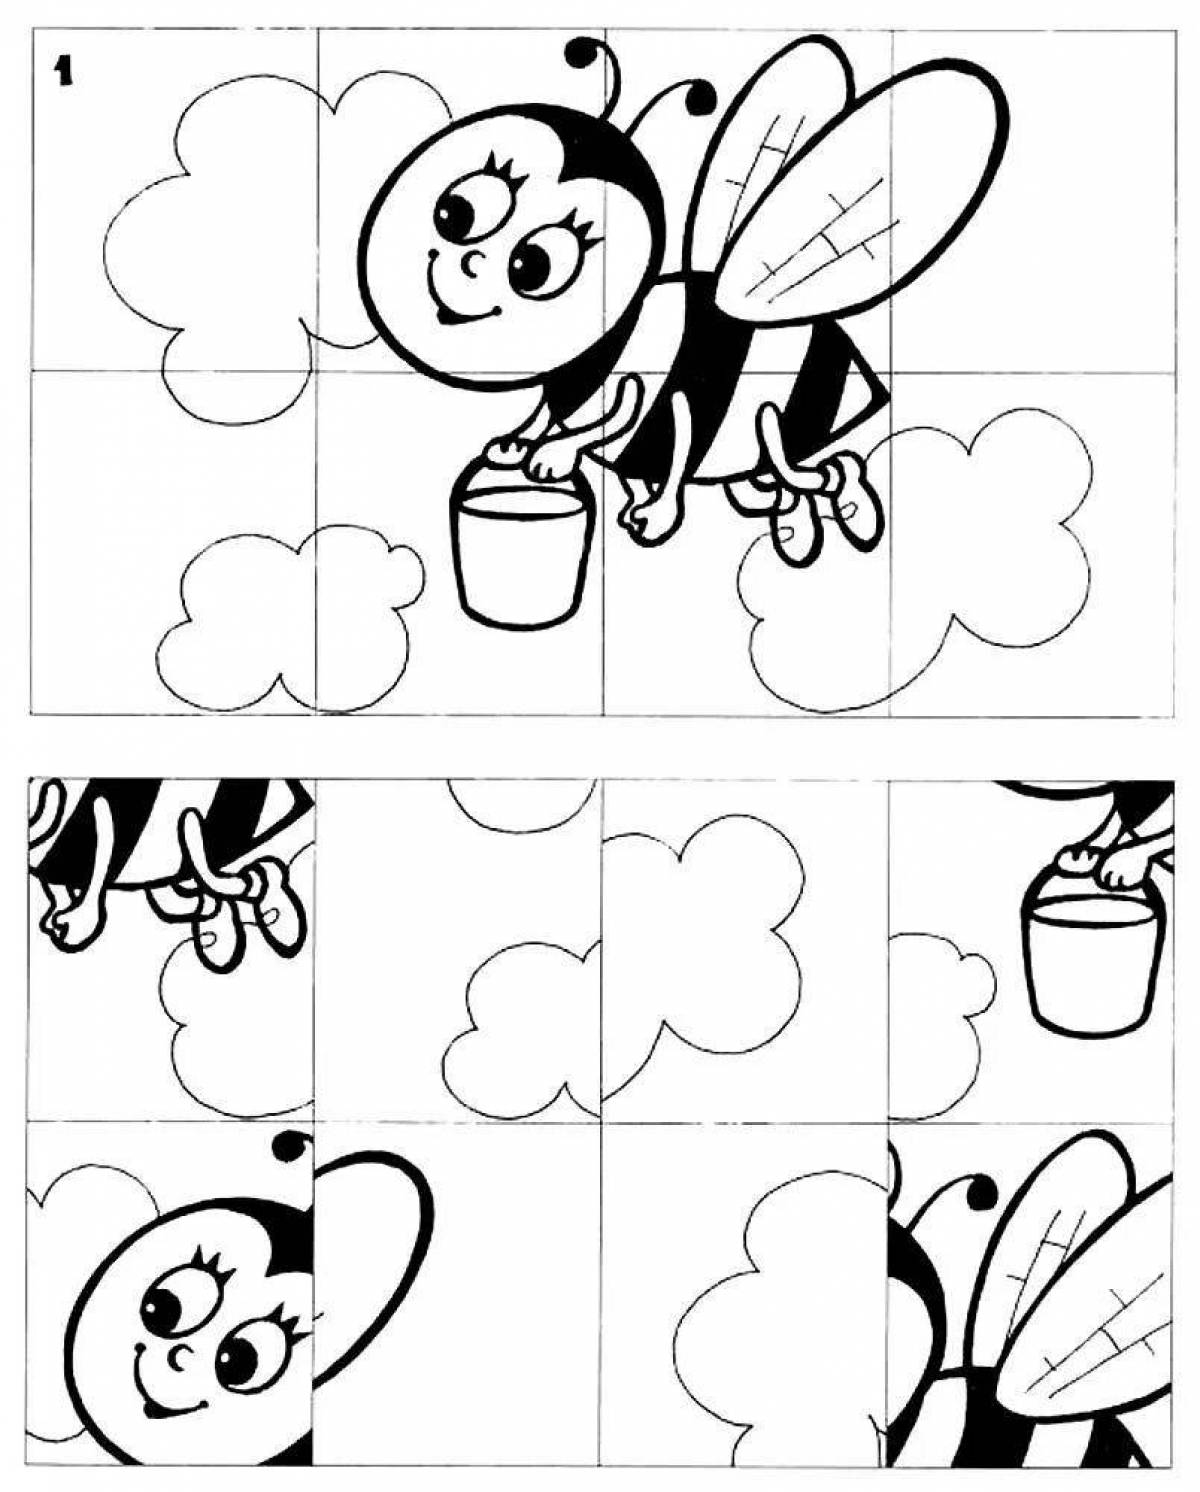 Stimulating coloring book for preschoolers with challenging tasks